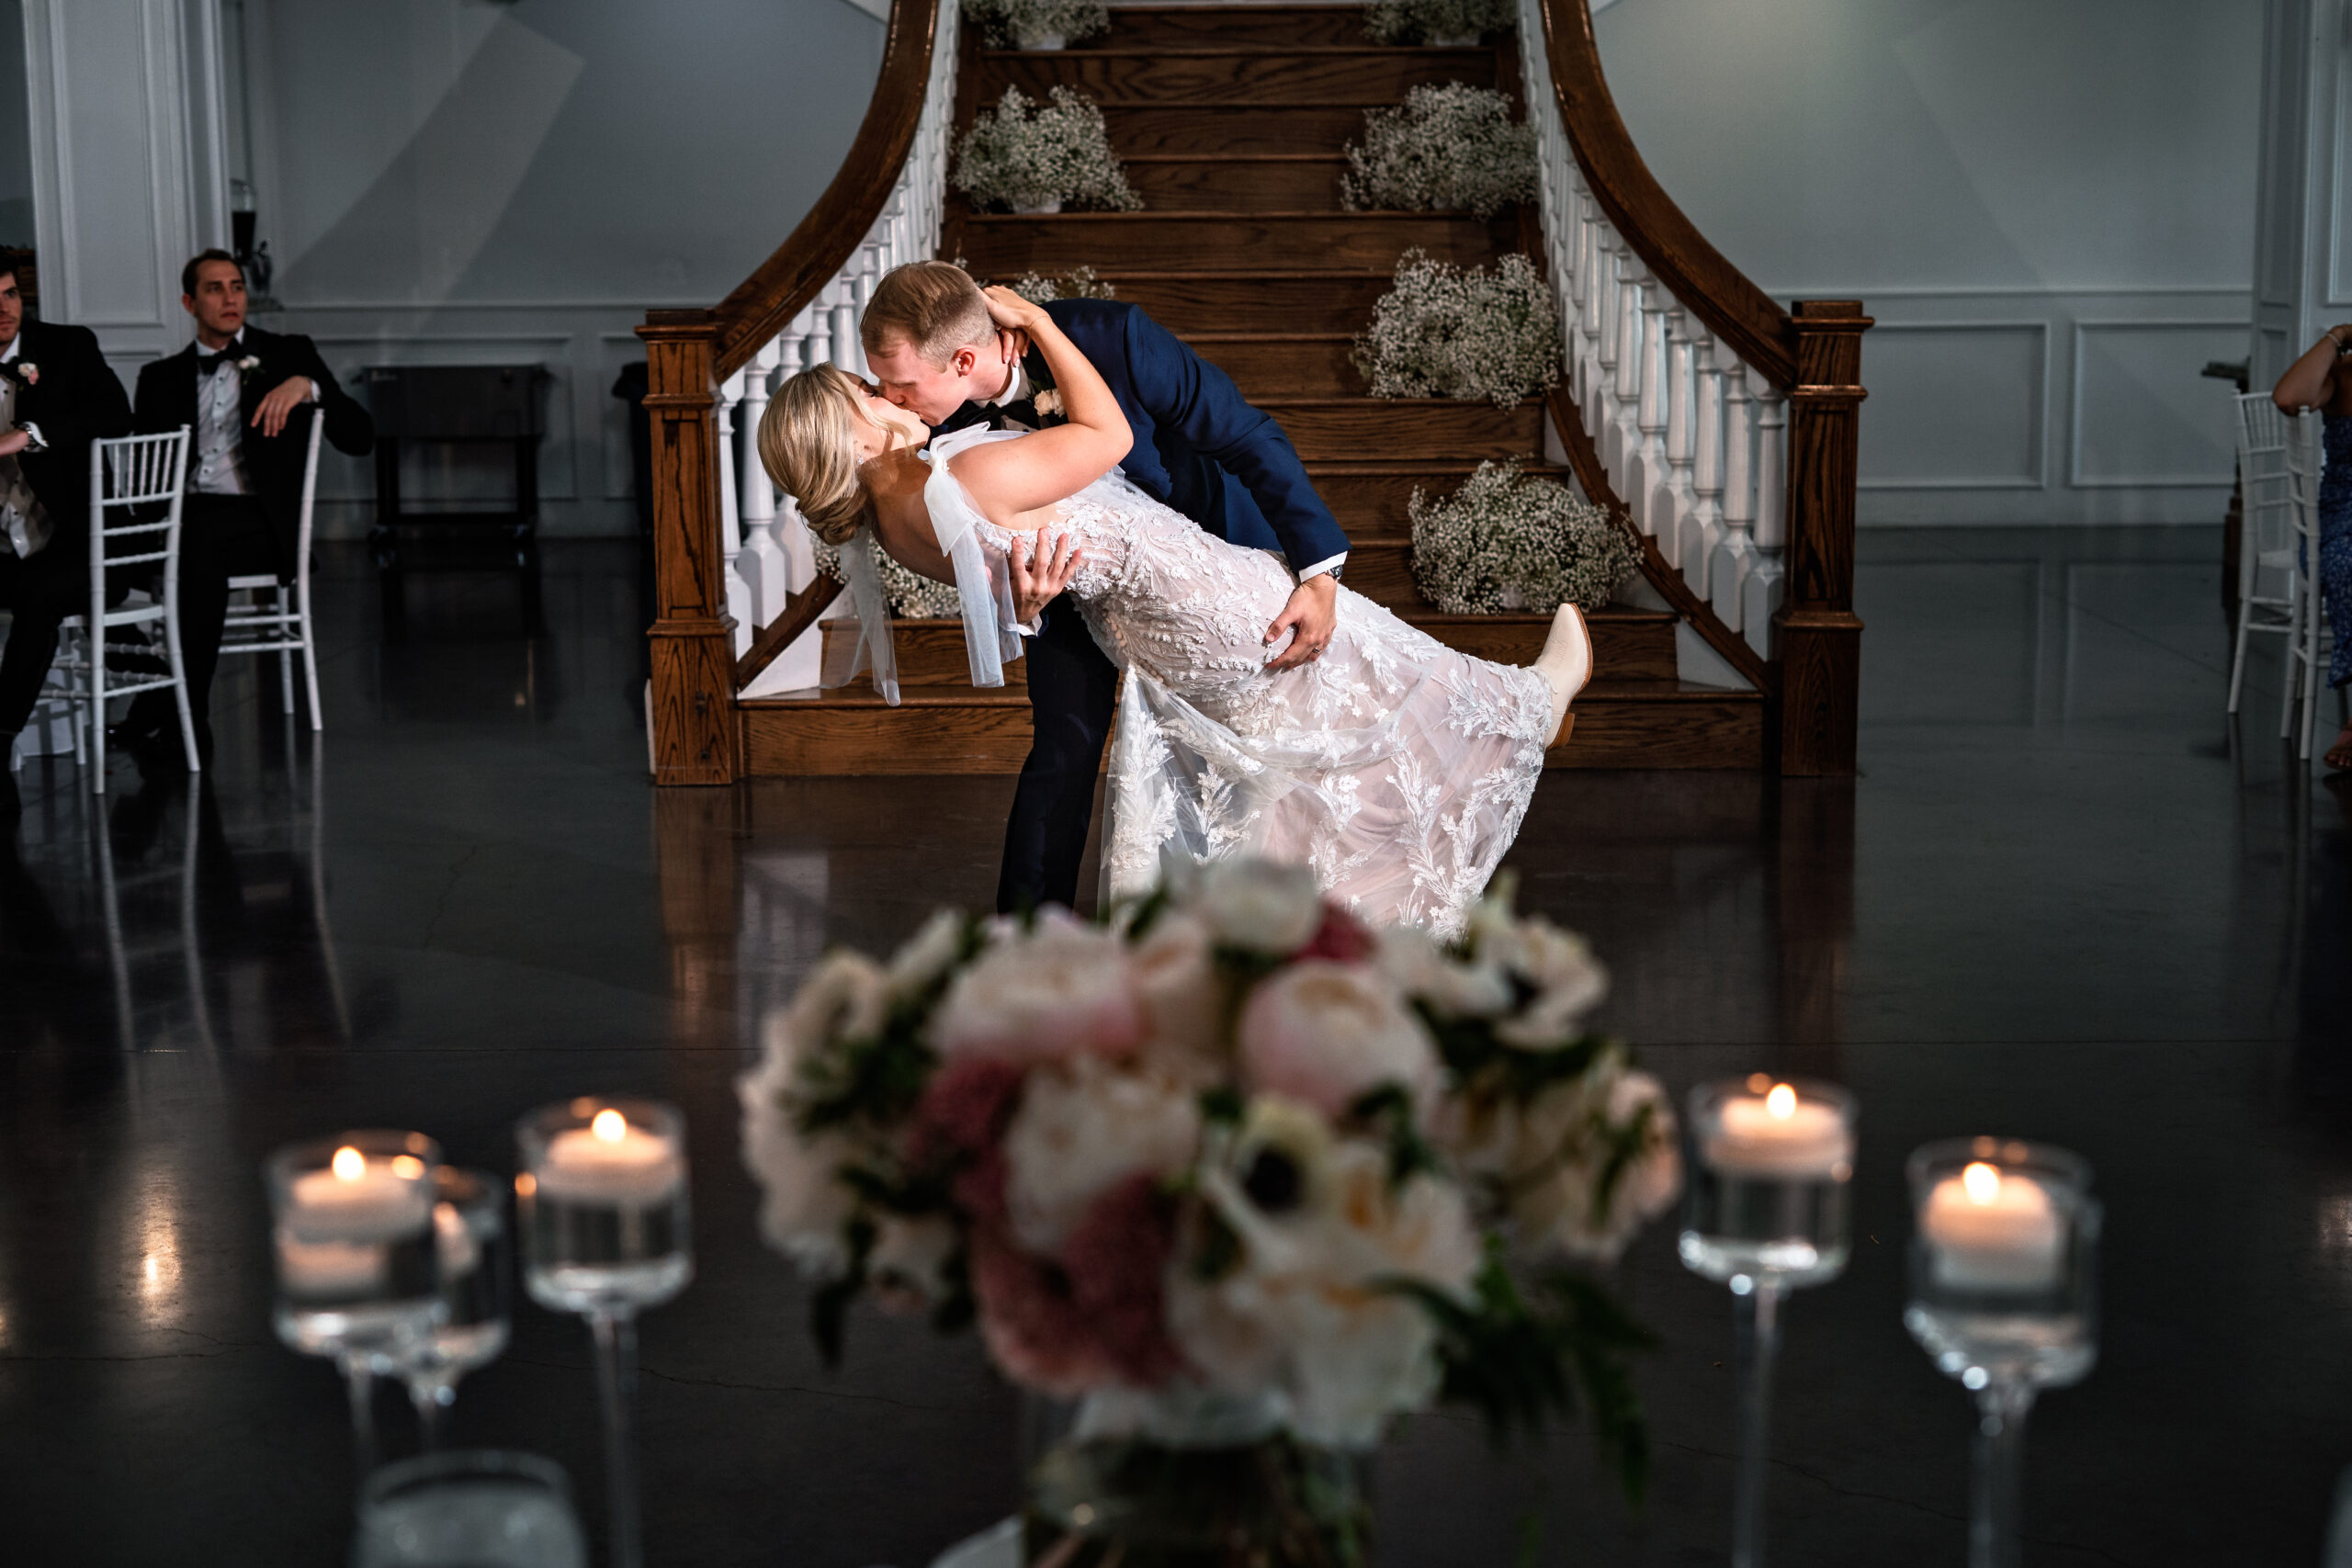 Bride and groom kiss during first dance